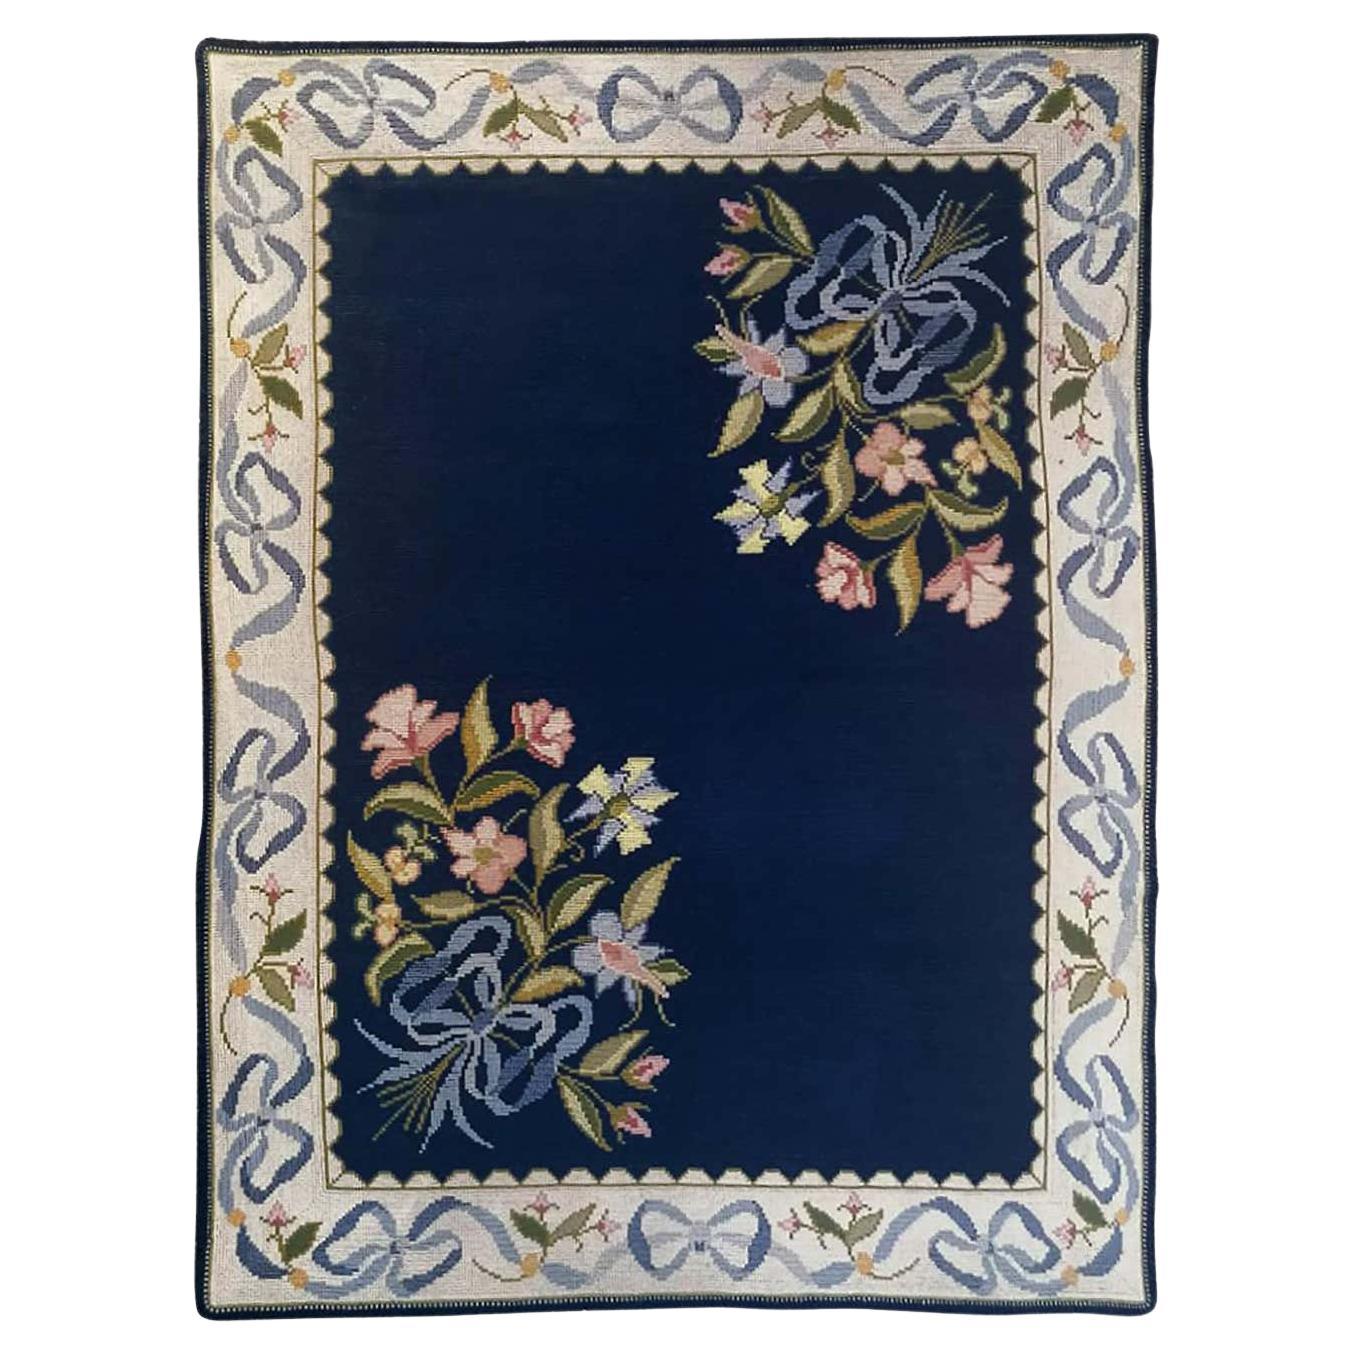 Floral European Portuguese Needlepoint Embroidered Arraiolos Rug in Blue & Cream